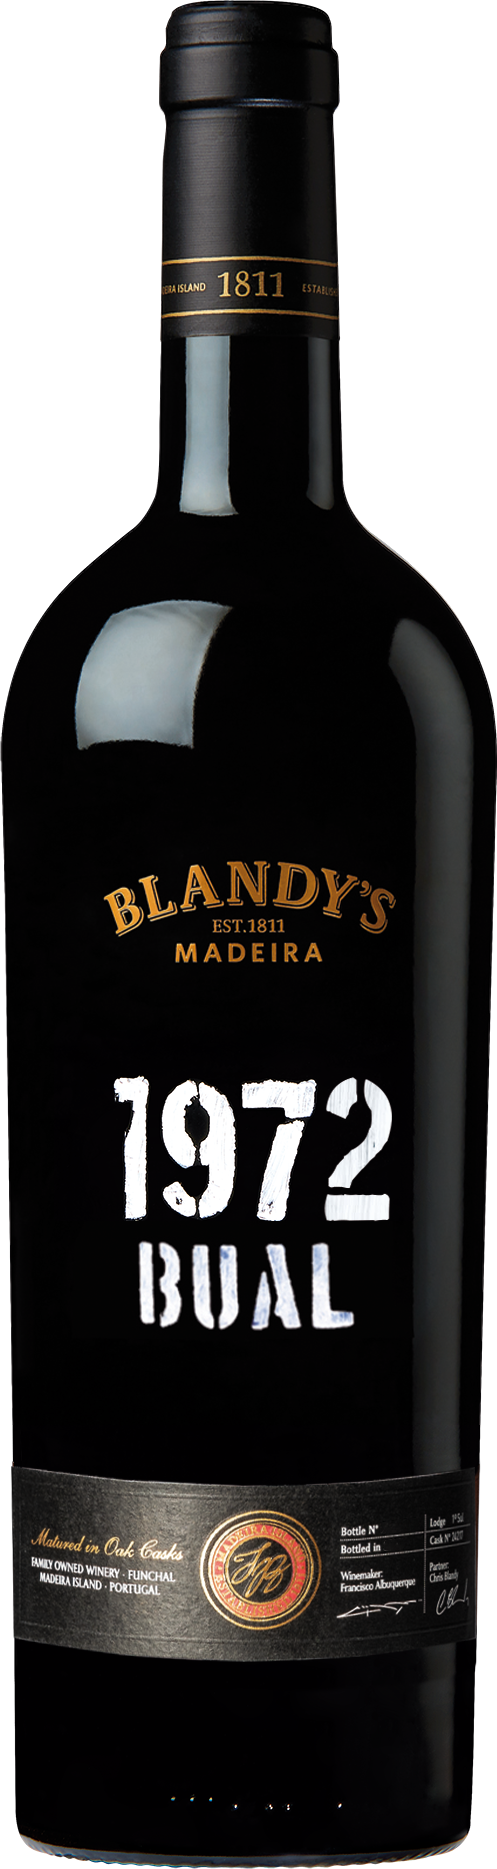 Product Image for BLANDY'S VINTAGE BUAL 1972 - MAGNUM (1.5L)